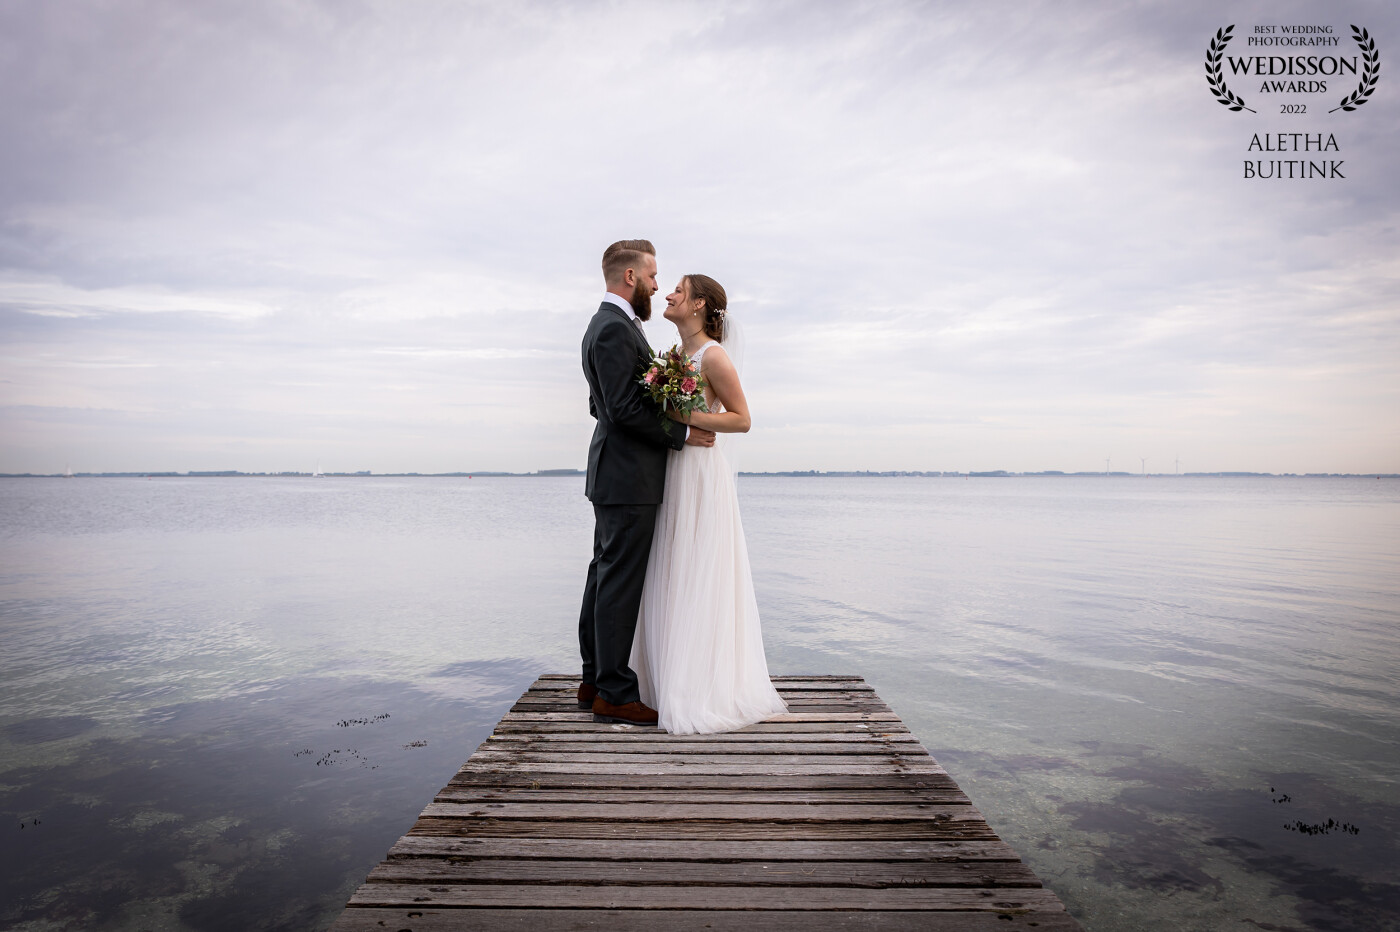 During the photoshoot of this bridal couple we specially drove to a small dock at the coast of one of the islands of Zeeland (The Netherlands). It was so quiet and serene there. The water so clear and still. Together with this lovely newlyweds made this a fantastic moment.